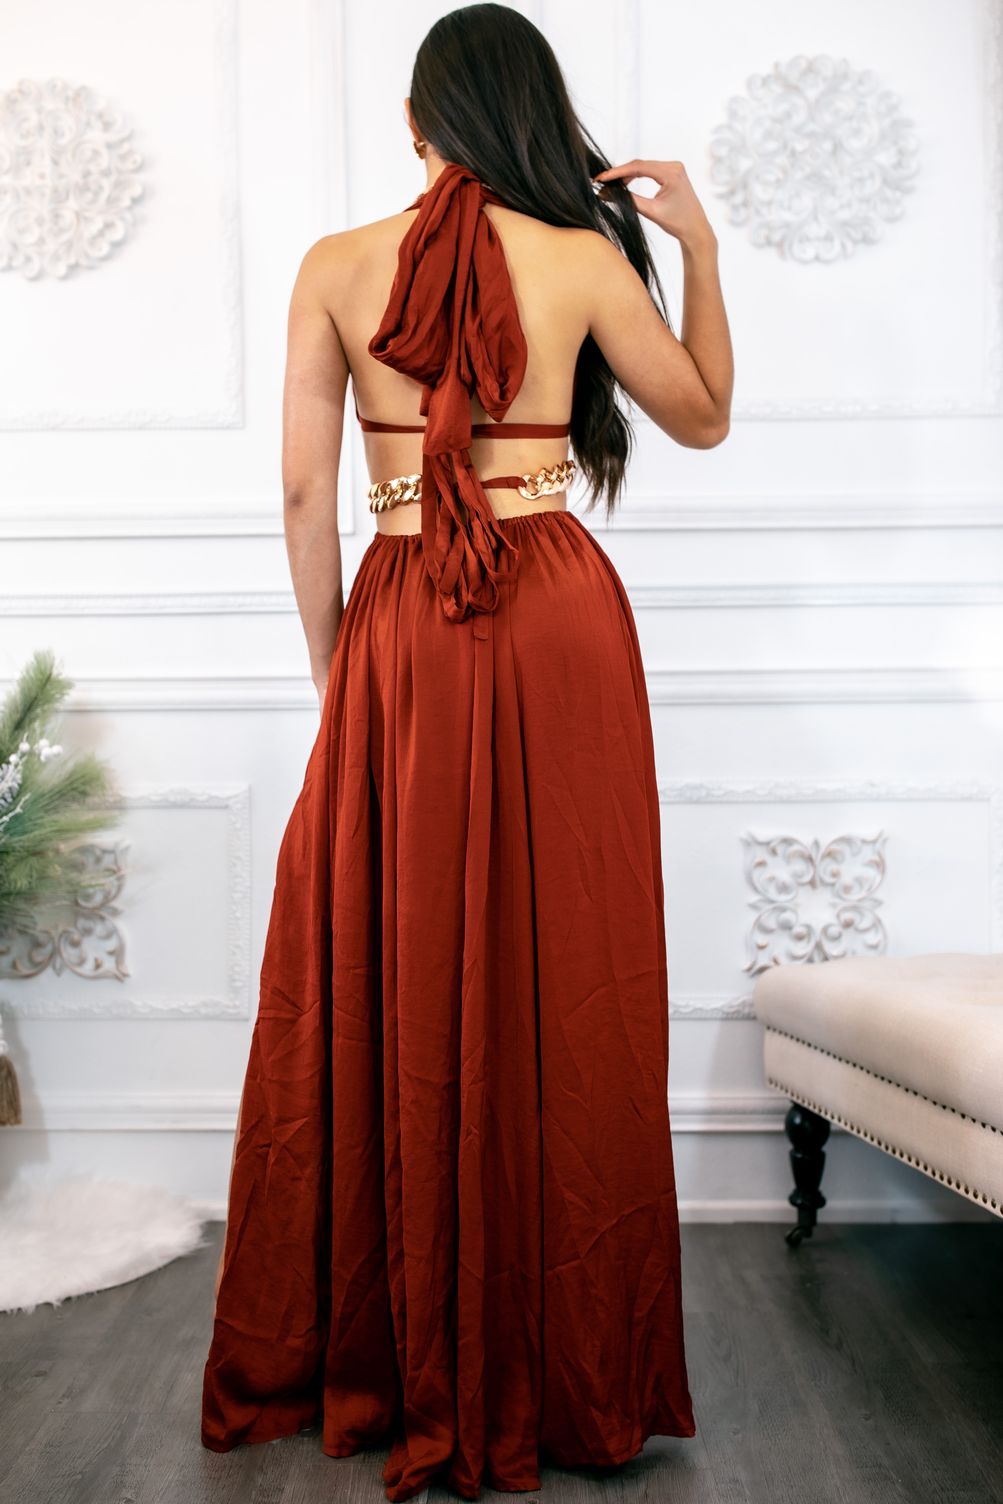 Extravaganza Cut Out Maxi with Side Slits Dress